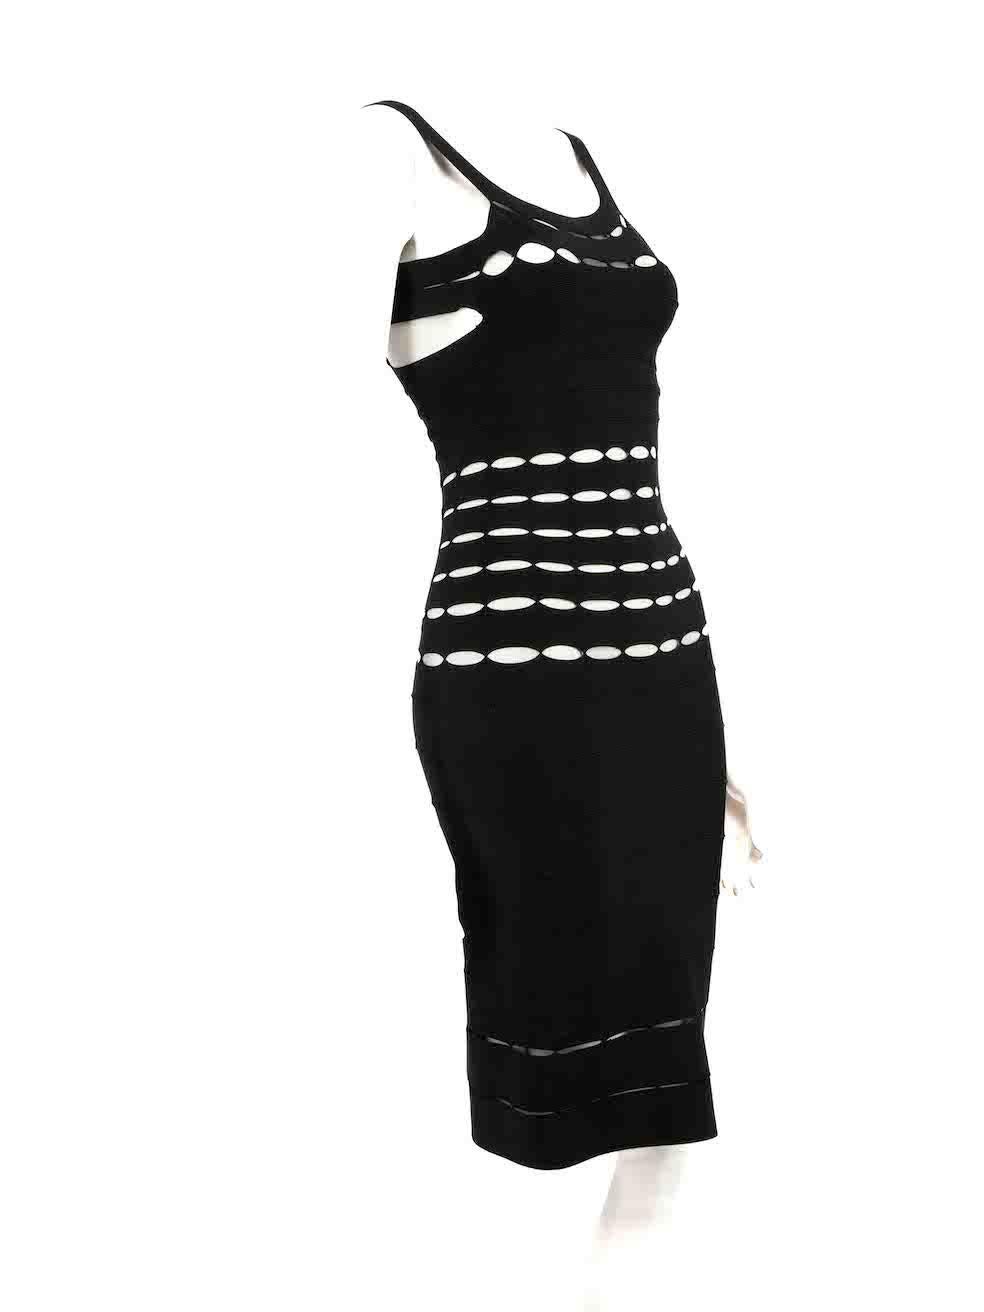 CONDITION is Very good. Hardly any visible wear to dress is evident on this used Herve Leger designer resale item.
 
 
 
 Details
 
 
 Black
 
 Rayon
 
 Bandage dress
 
 Midi
 
 Off the shoulder straps
 
 Cut out details
 
 Stretchy
 
 Figure